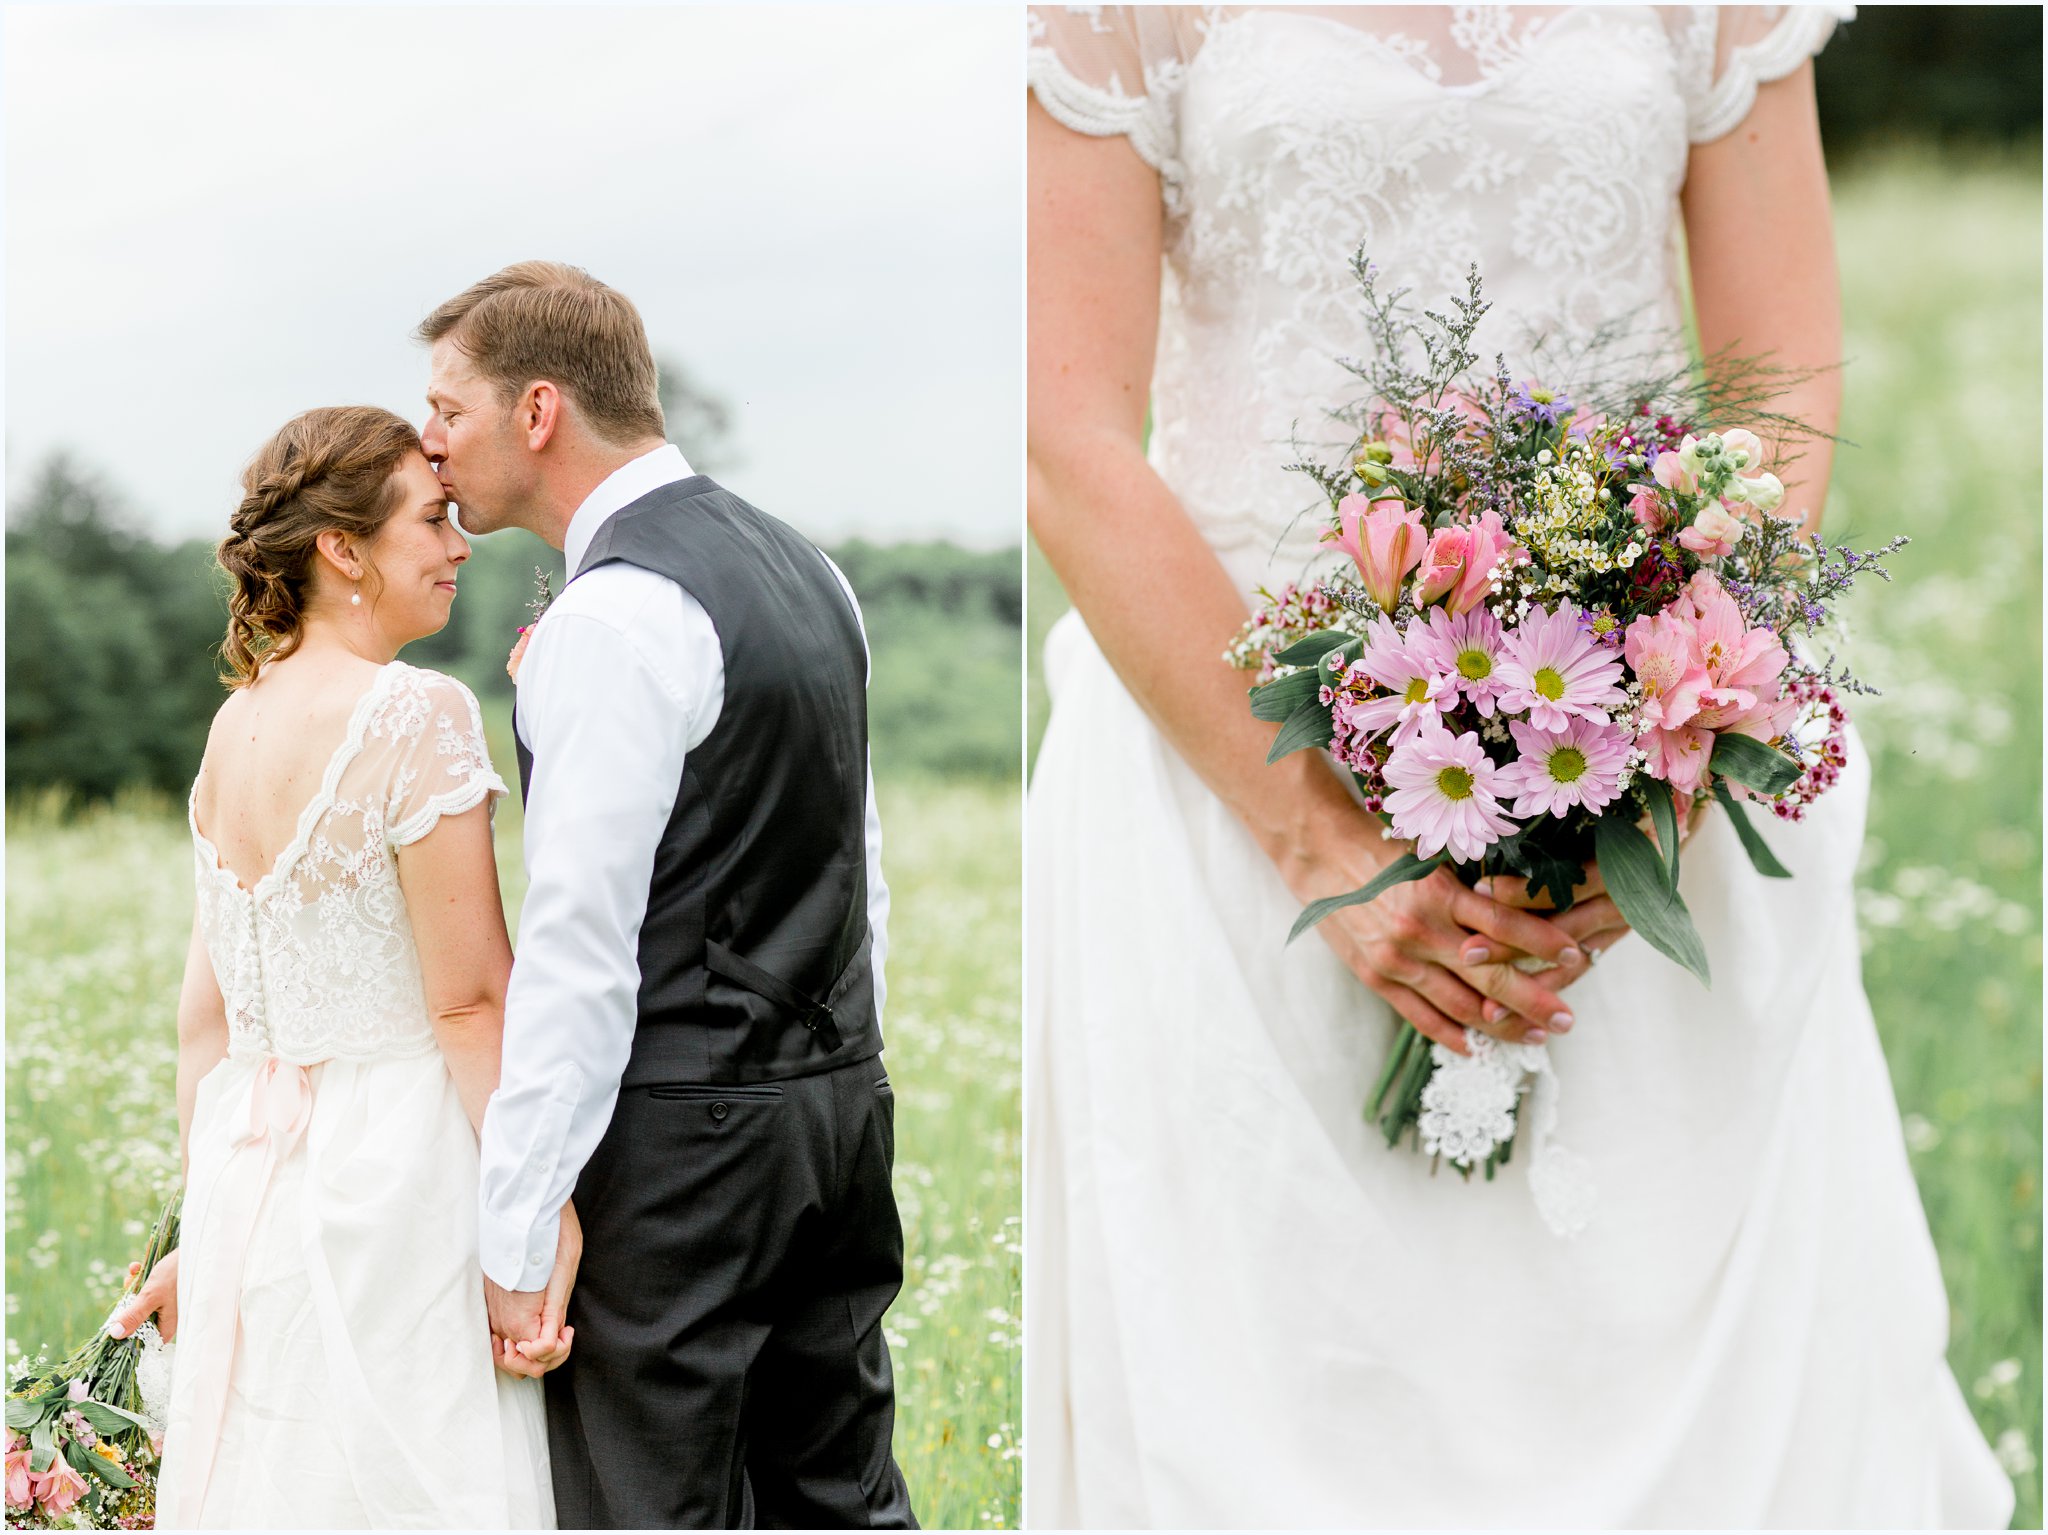 Handmade lace wedding dress and florals